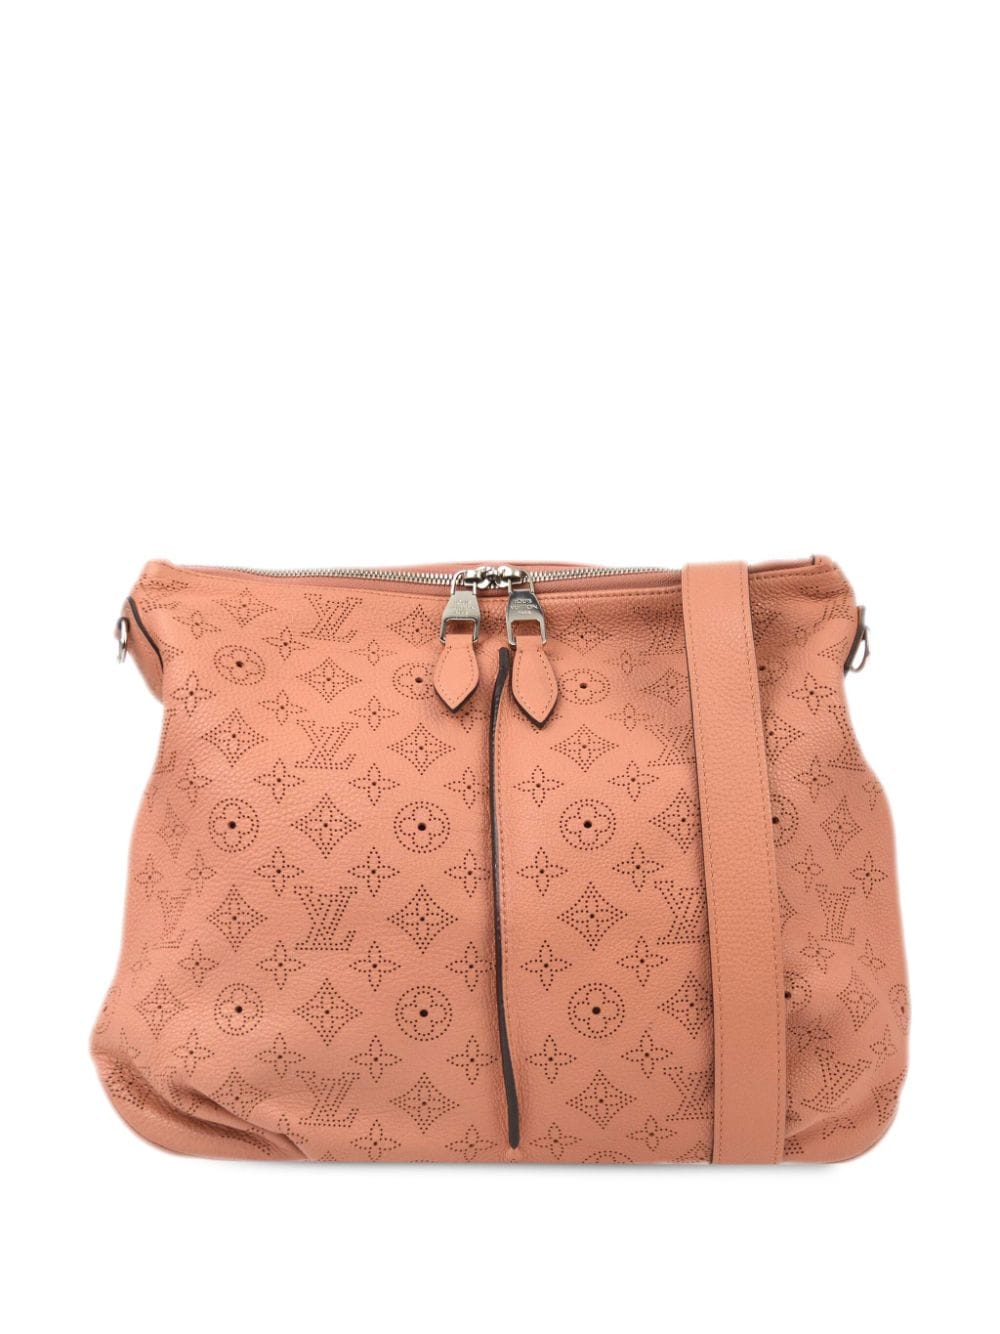 Pre-owned Louis Vuitton 2013 Selene Pm Shoulder Bag In Pink